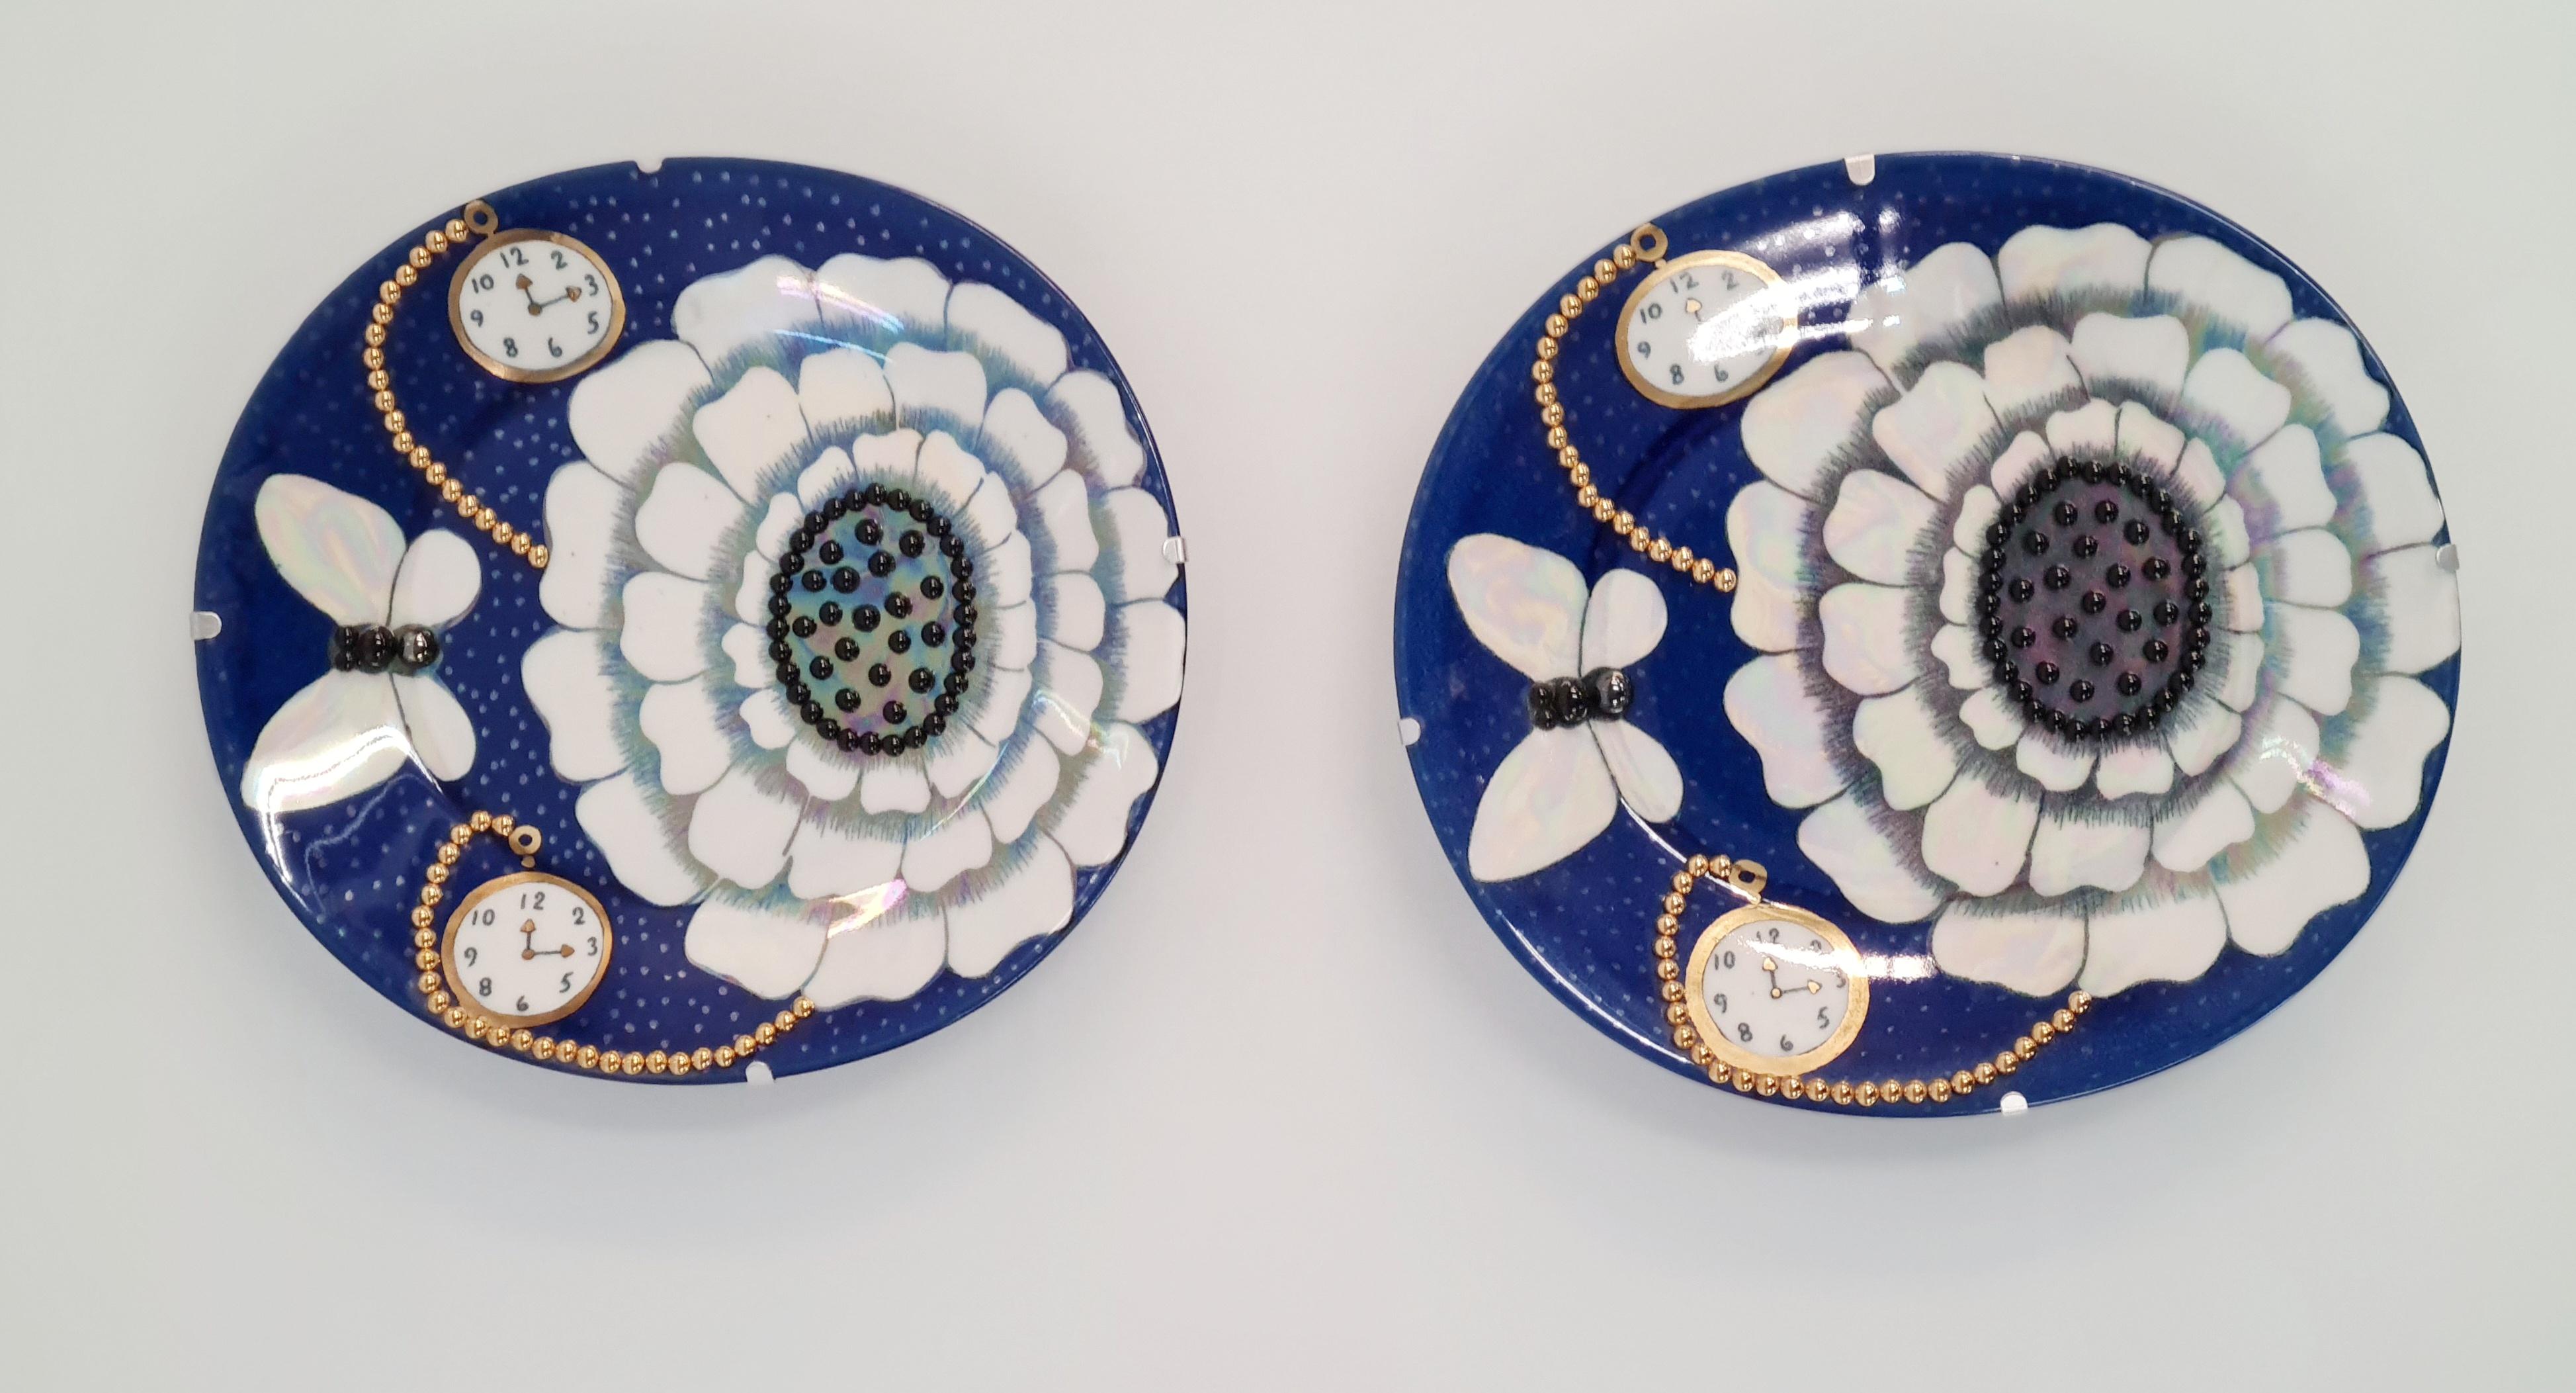 A pair of lovely decorative plates by Birger Kaipiainen, manufactured by Arabia of Finland in the late 20th century. 
Birger Kaipiainen was one of the most prominent names in Finnish design history, and a leading name in ceramic art. He had a very